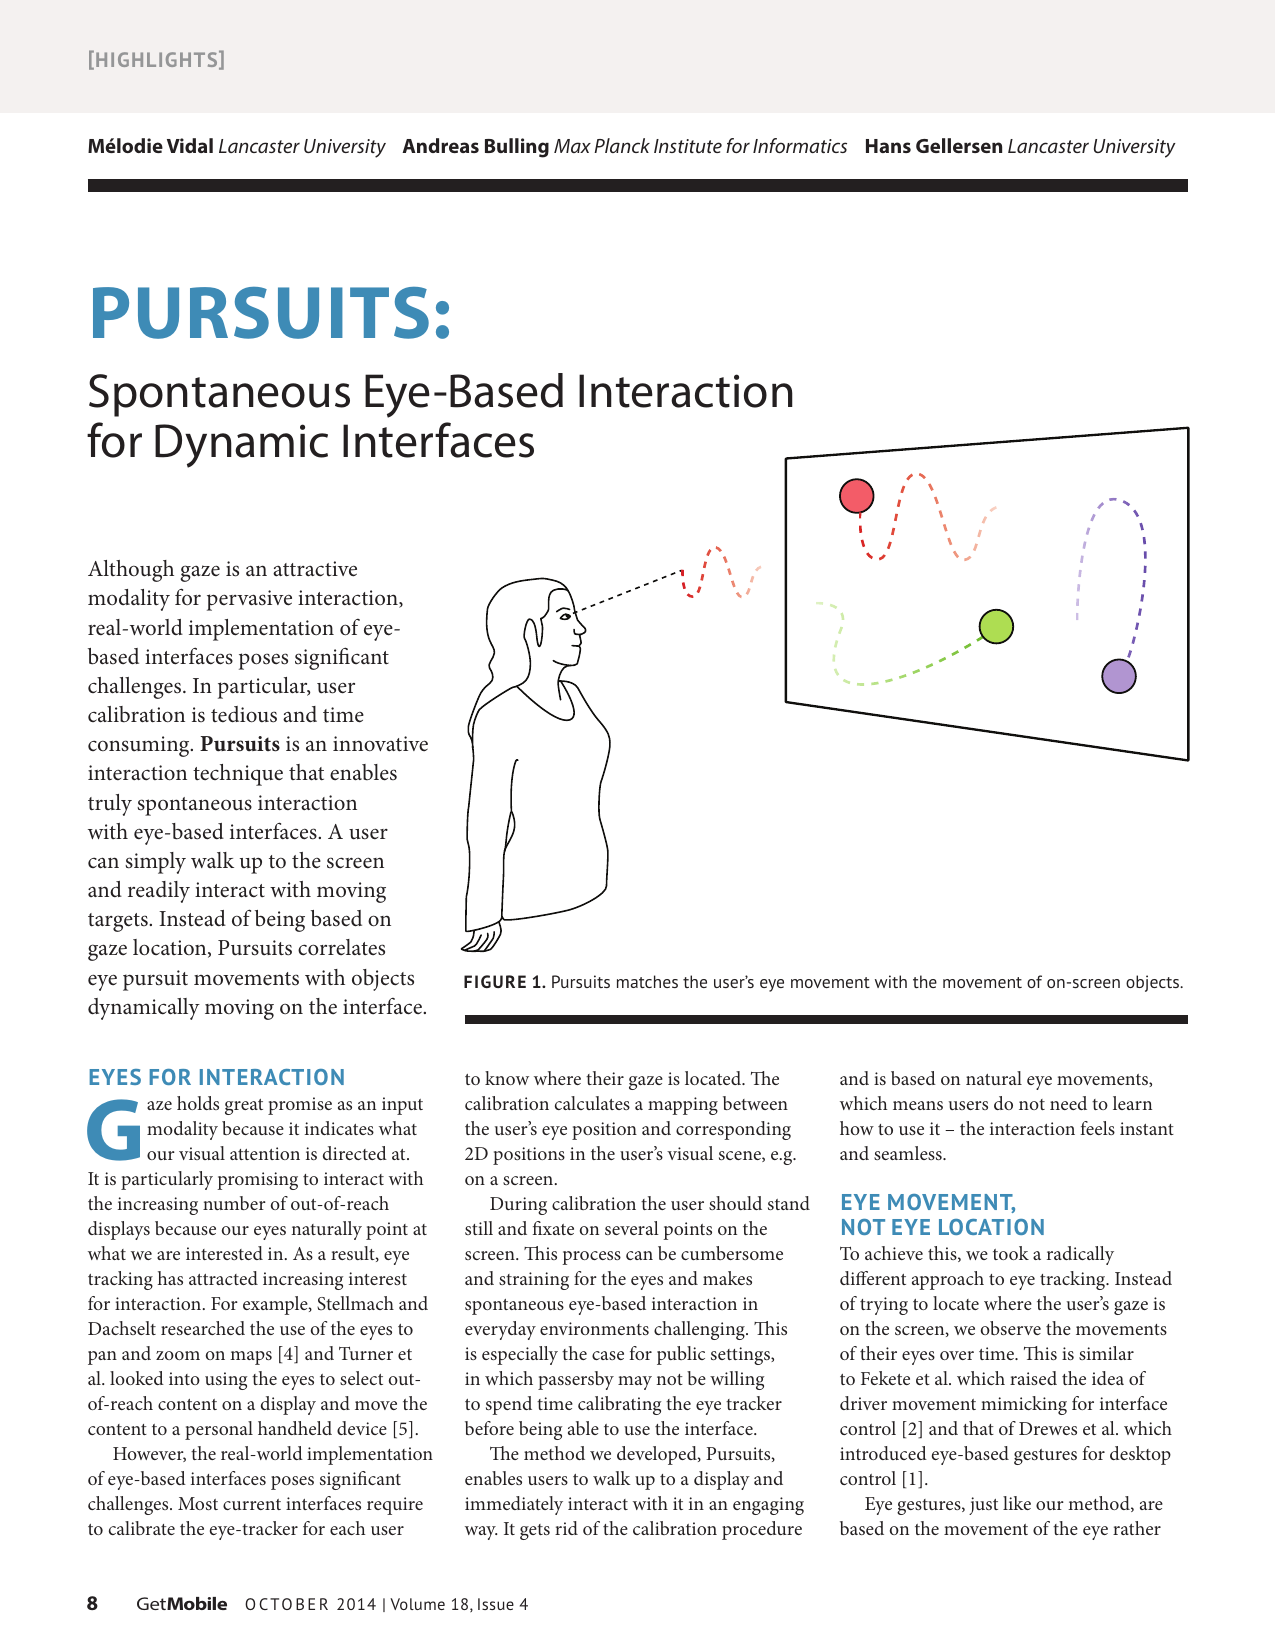 Pursuits: Spontaneous Eye-Based Interaction for Dynamic Interfaces